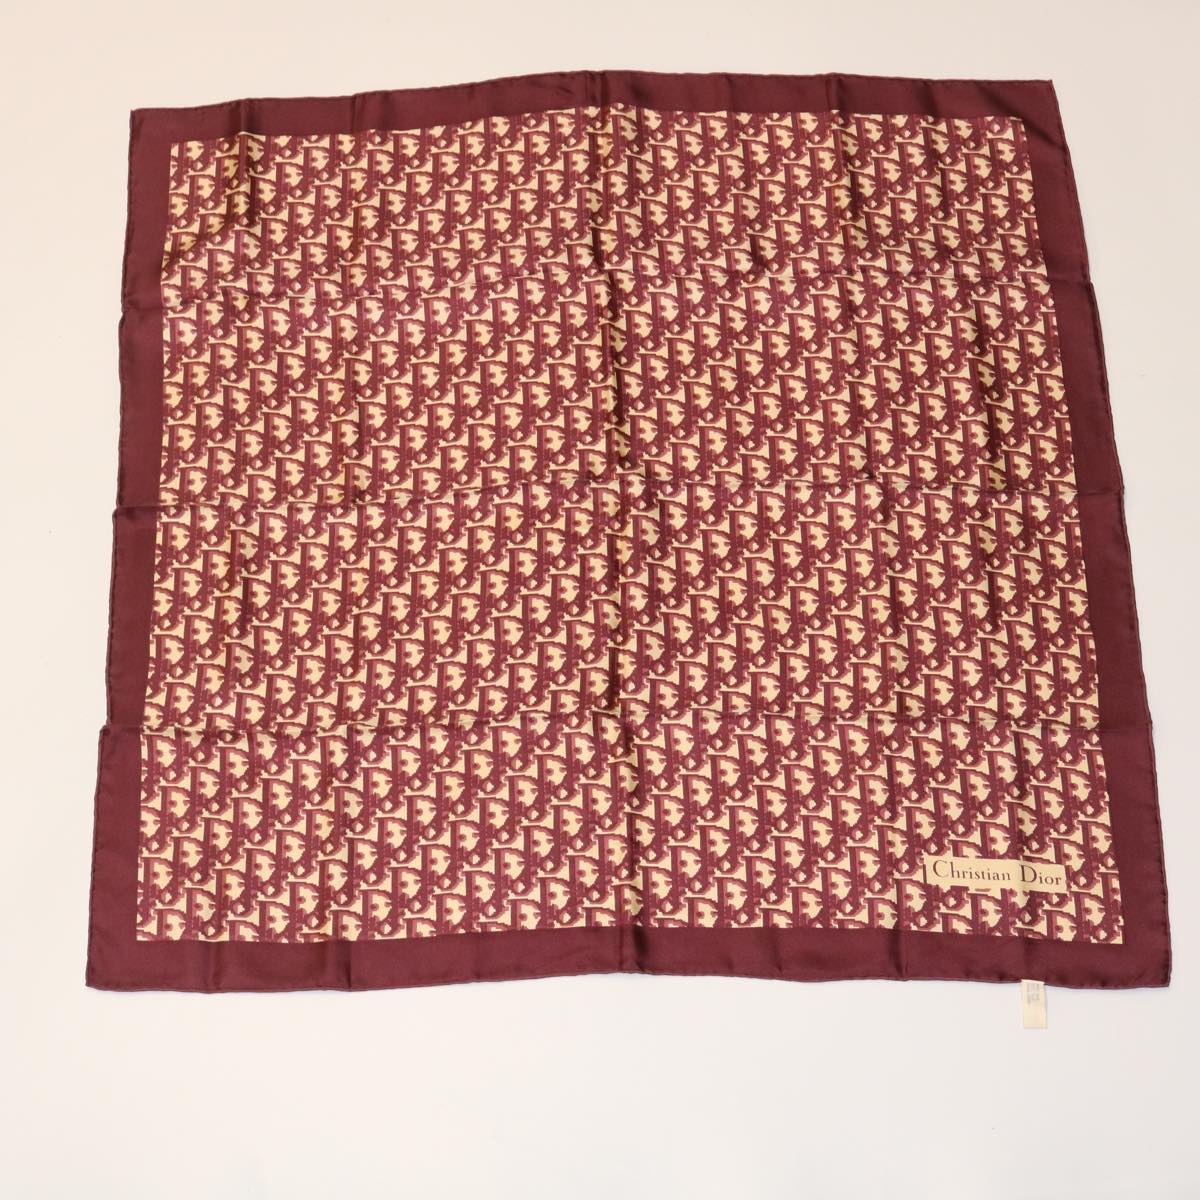 Christian Dior Trotter Scarf Silk 2 pieces Wine Red Black Auth am2432g